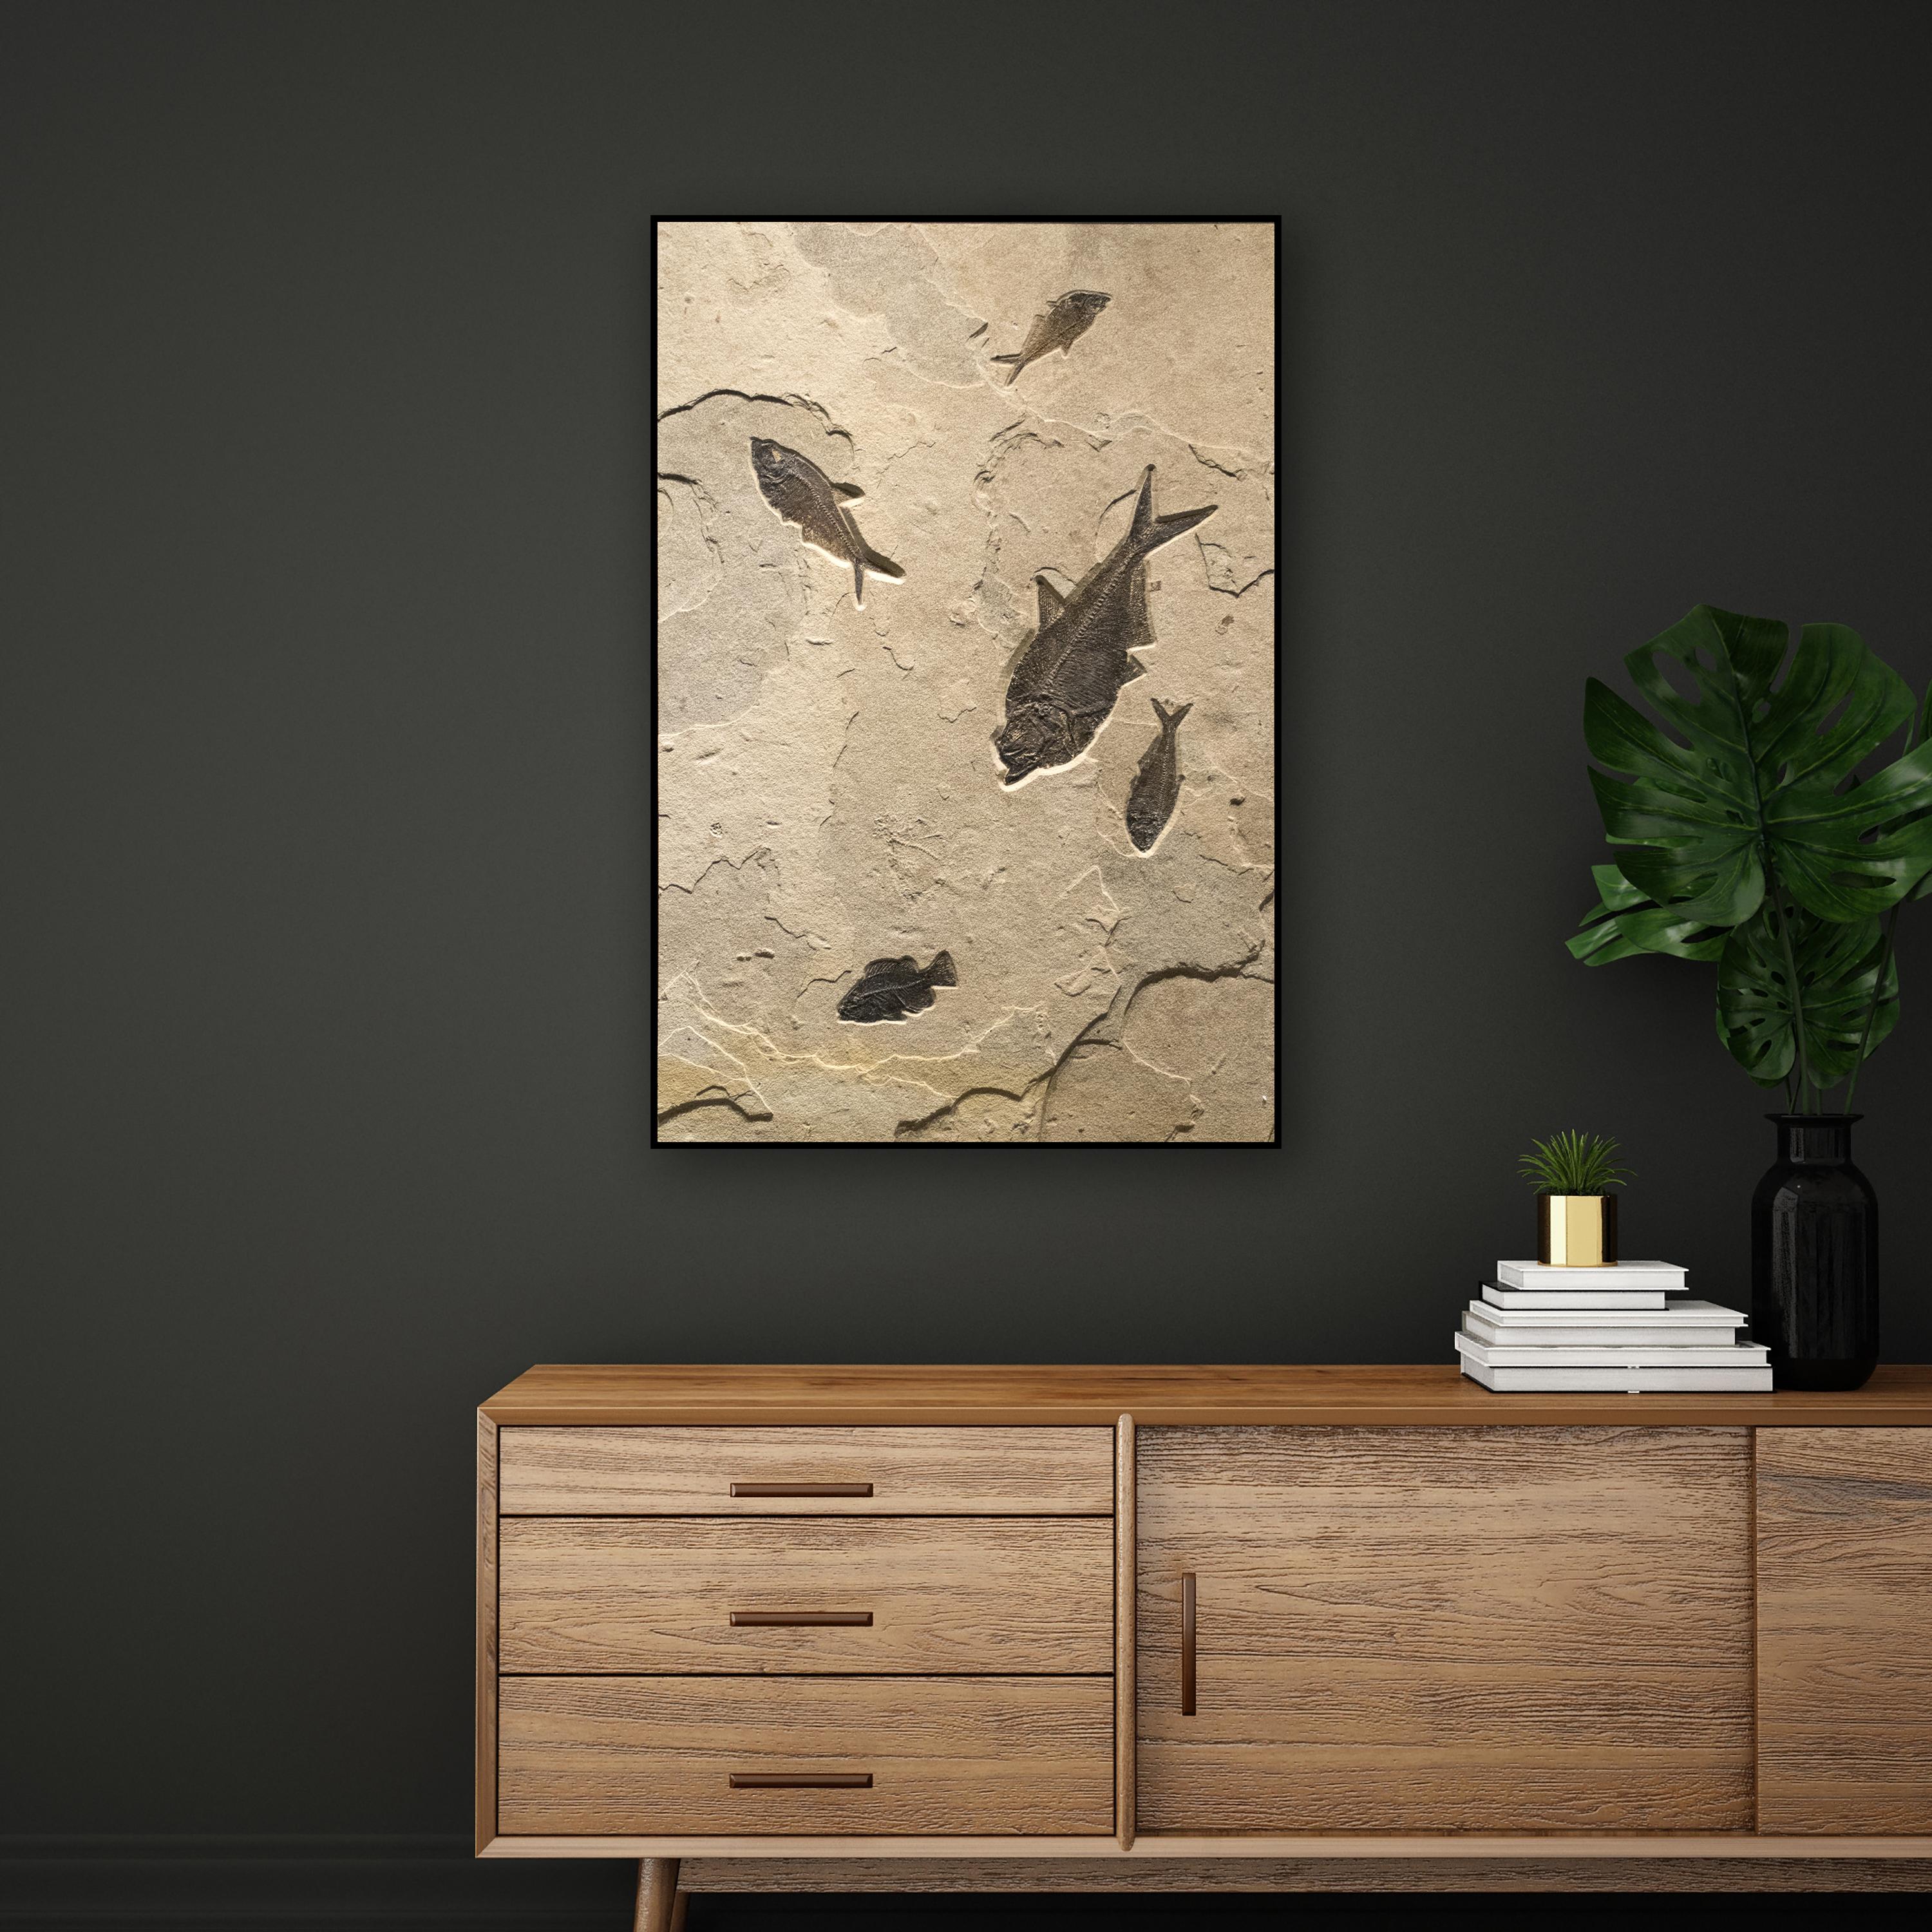 This unique fossil mural features four Diplomystus dentatus and one Cockerellites liops (formerly known as Priscacara), all of which are Eocene era fossils dating back about 50 million years. This grouping of ancient fish is forever preserved in a